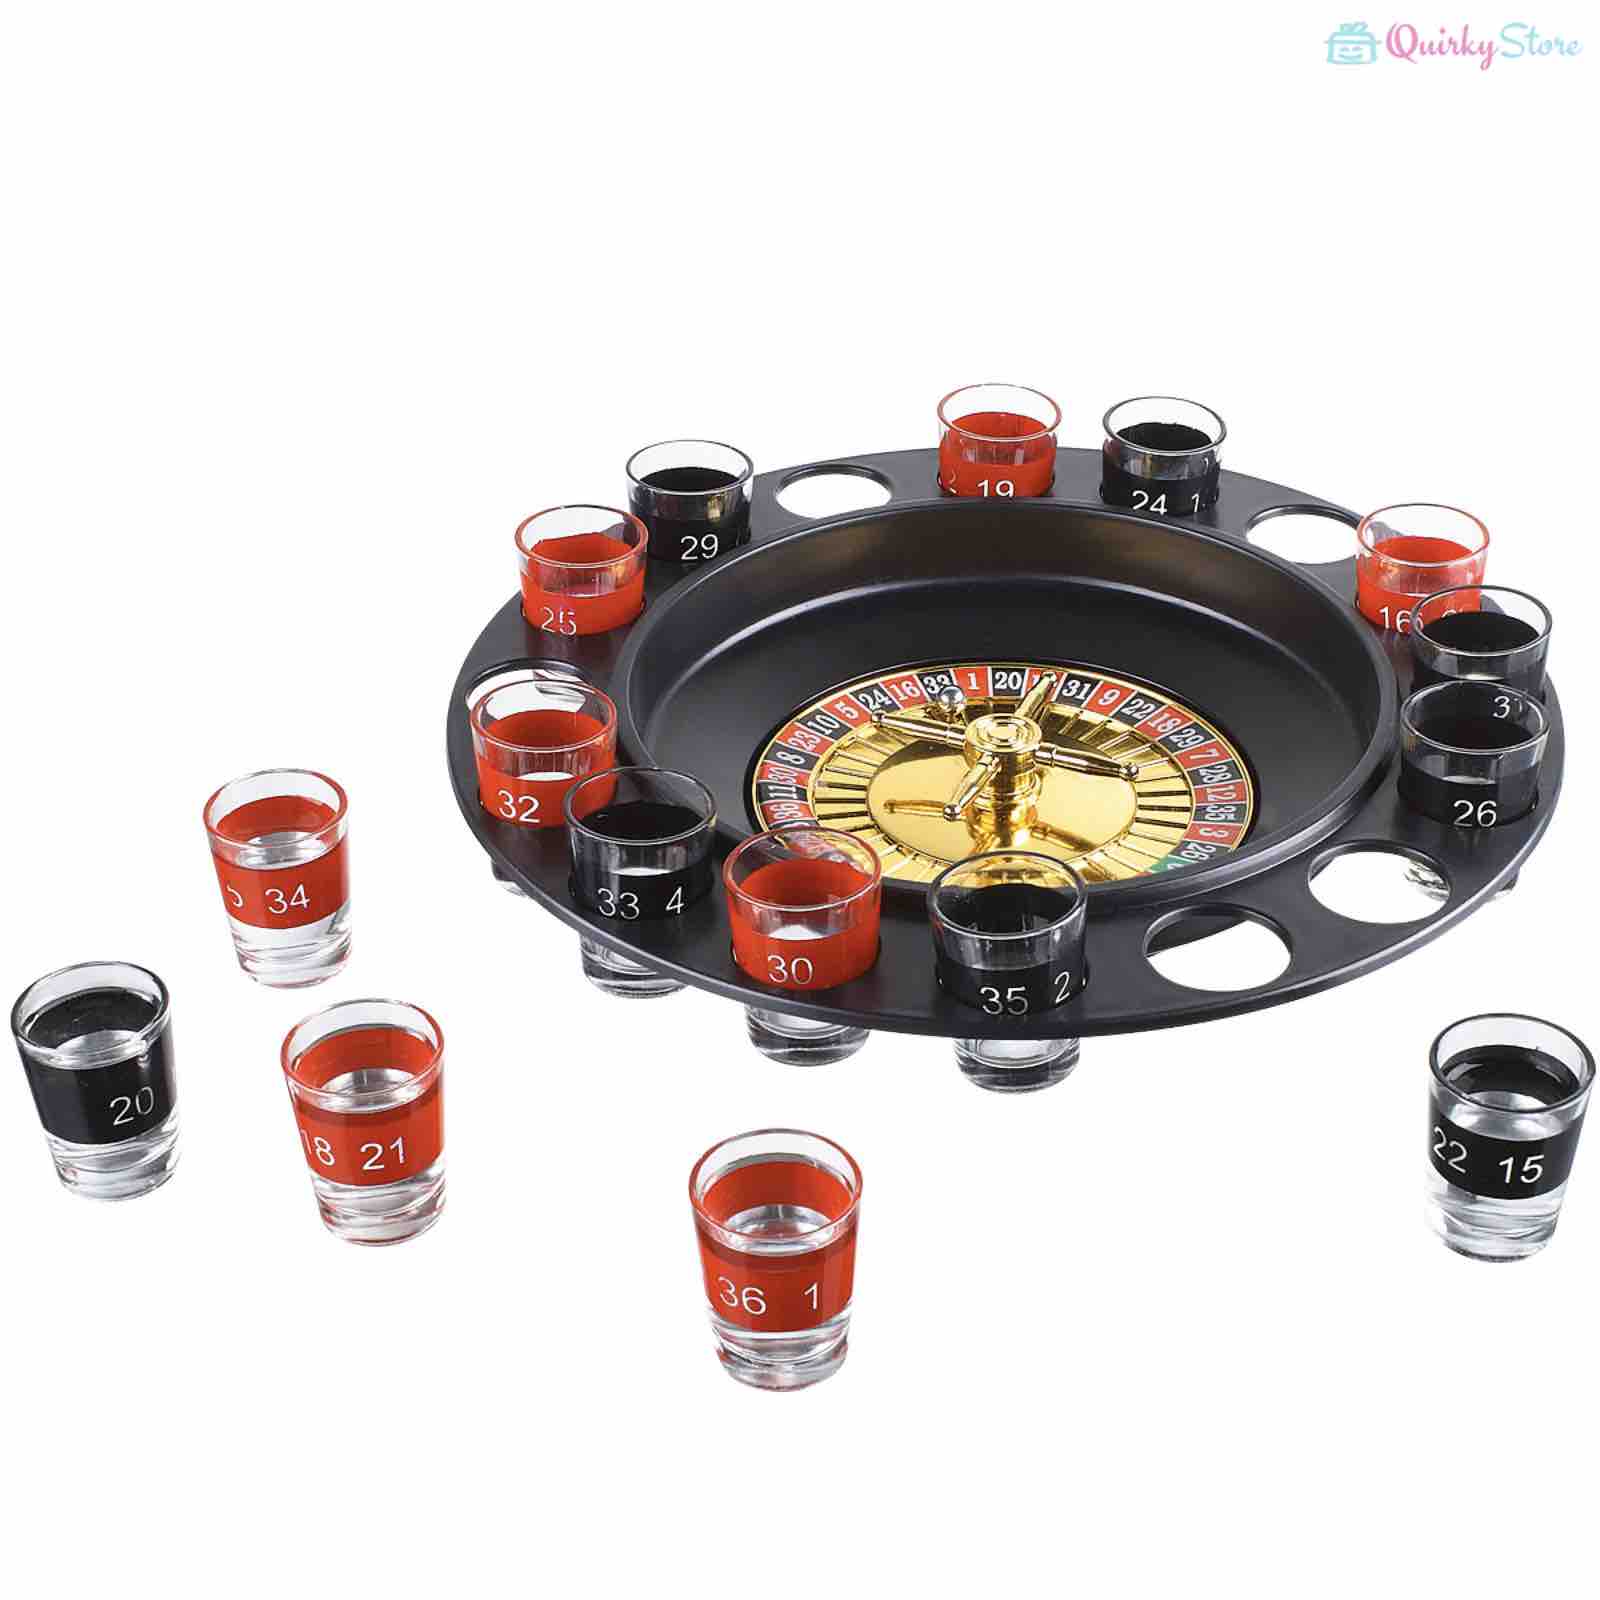 Buy Prakal 16 pcs Set Shot Glass Cup Russian Roulette Beer Glasses Set for  Wedding Bar Wine Glass Cocktail Shaker for Cup Online at Low Prices in  India 